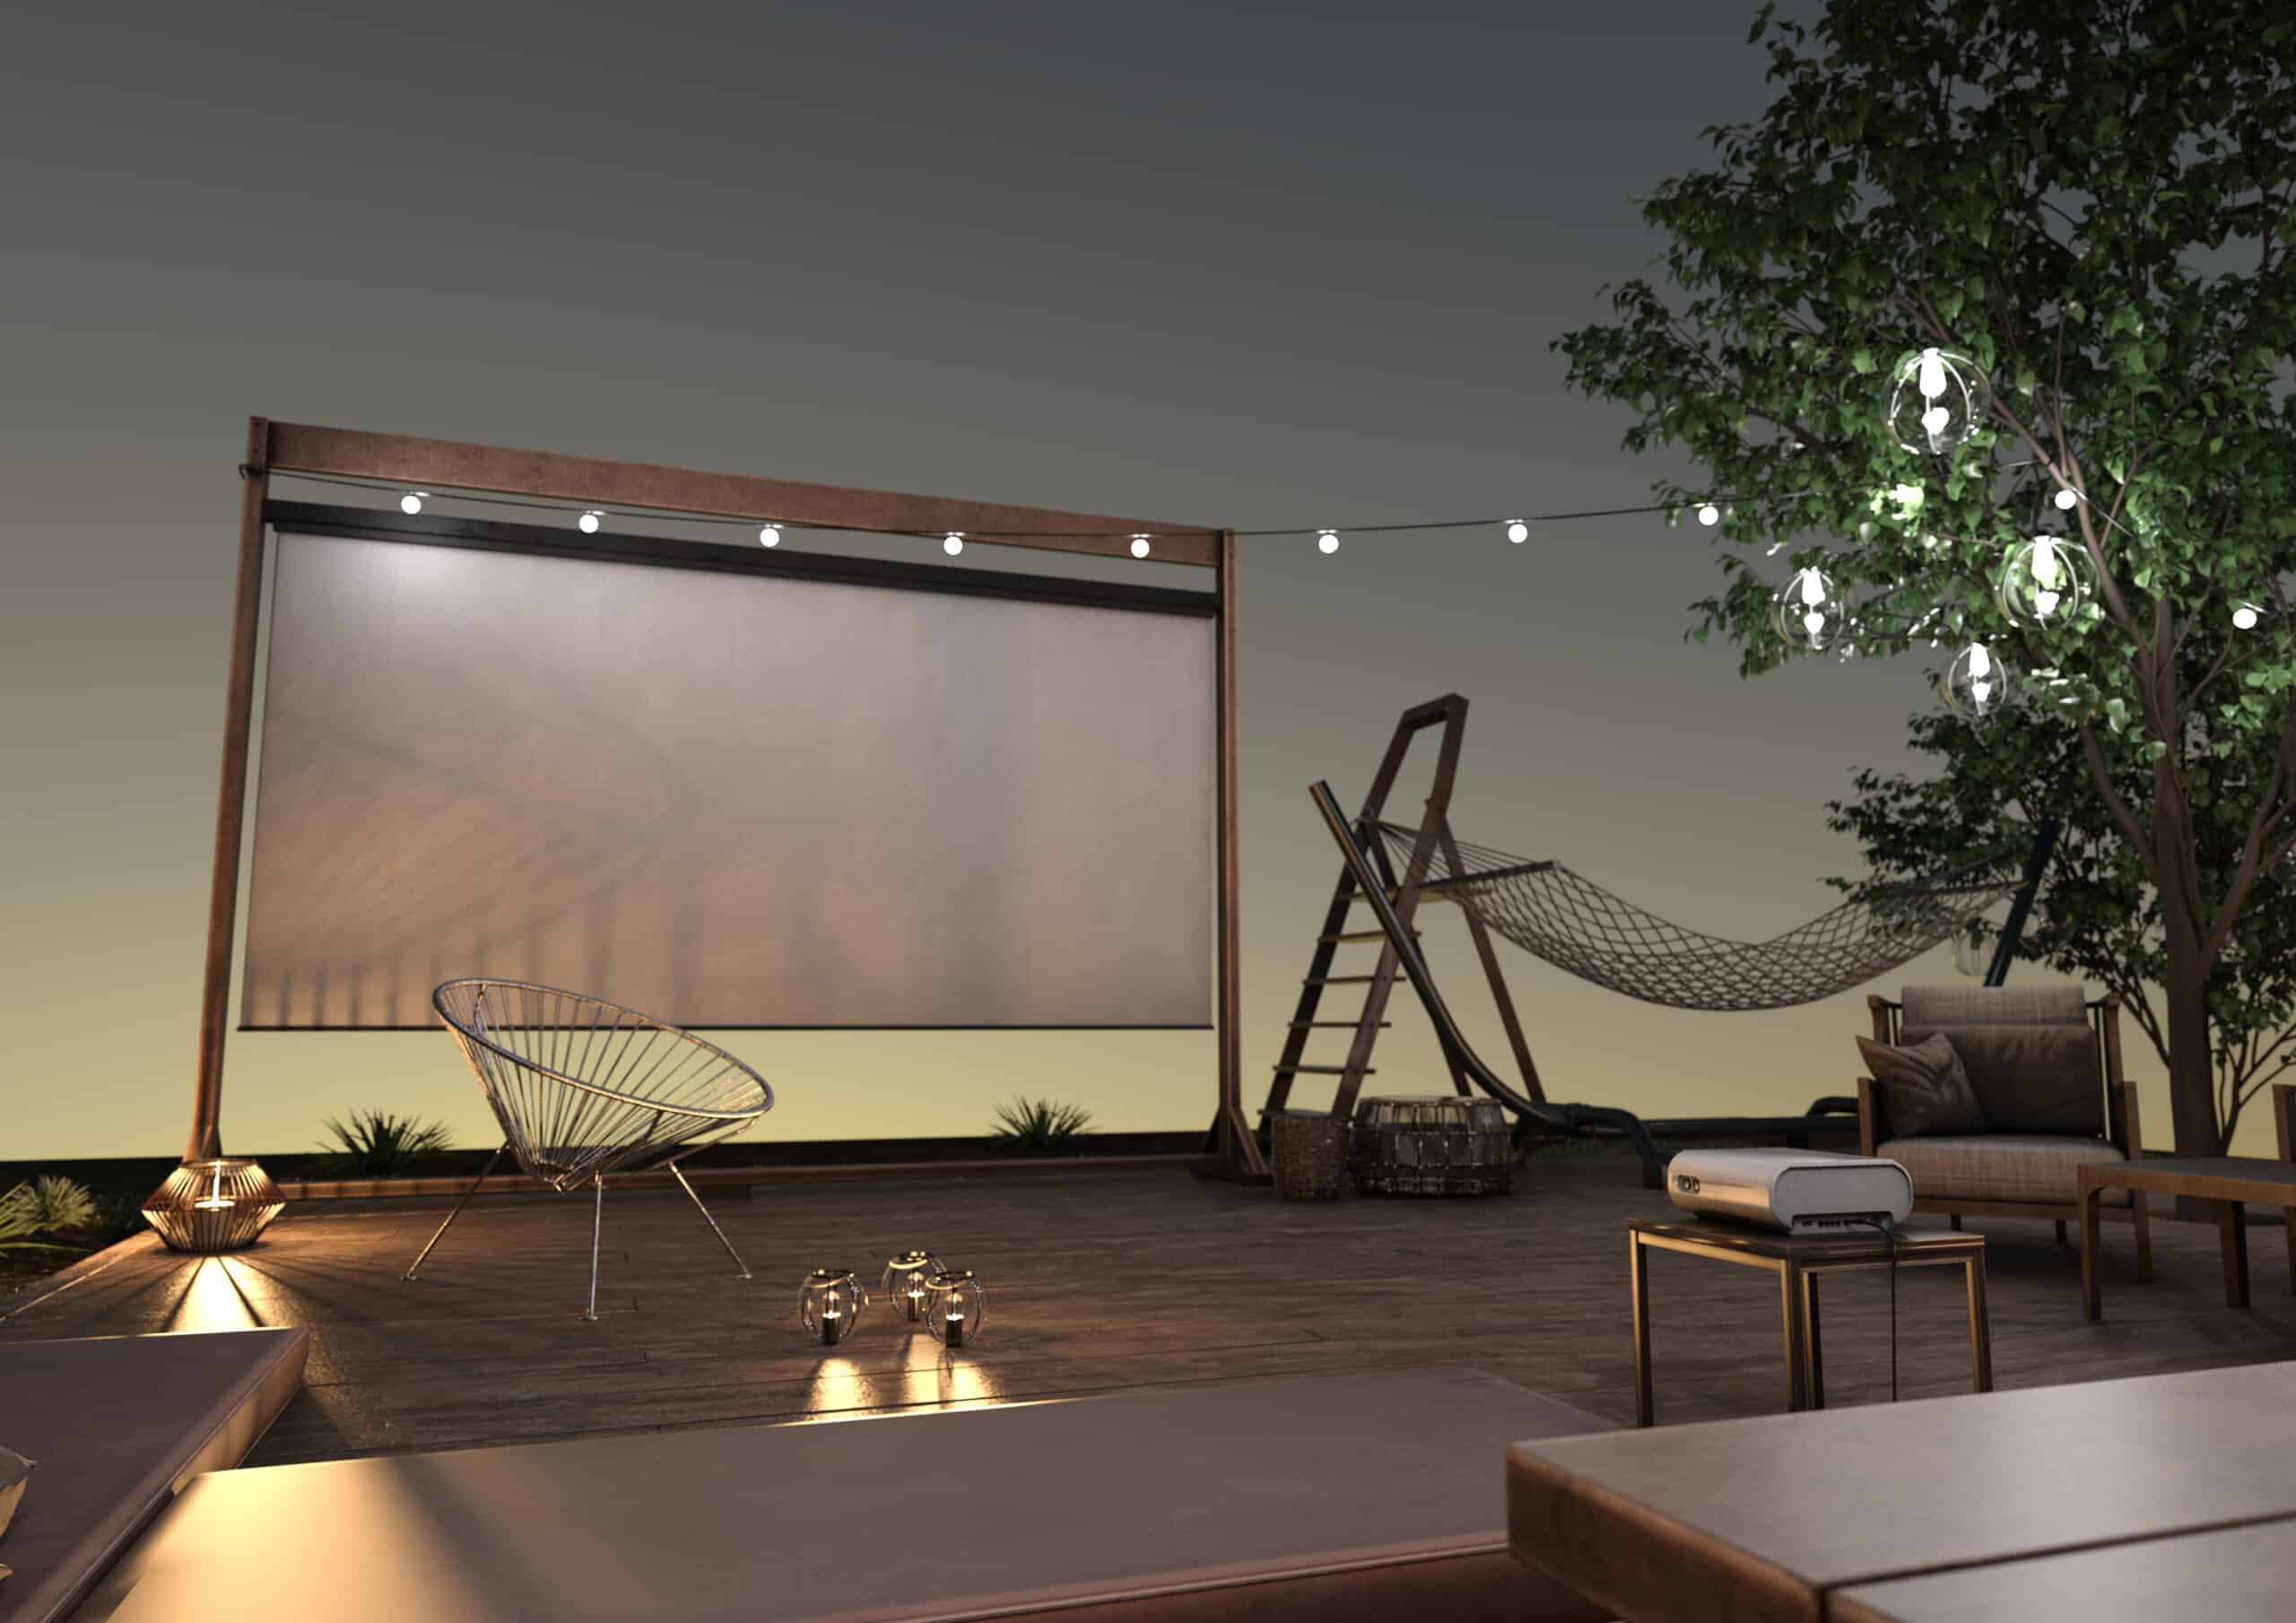 Projector outdoors home theater